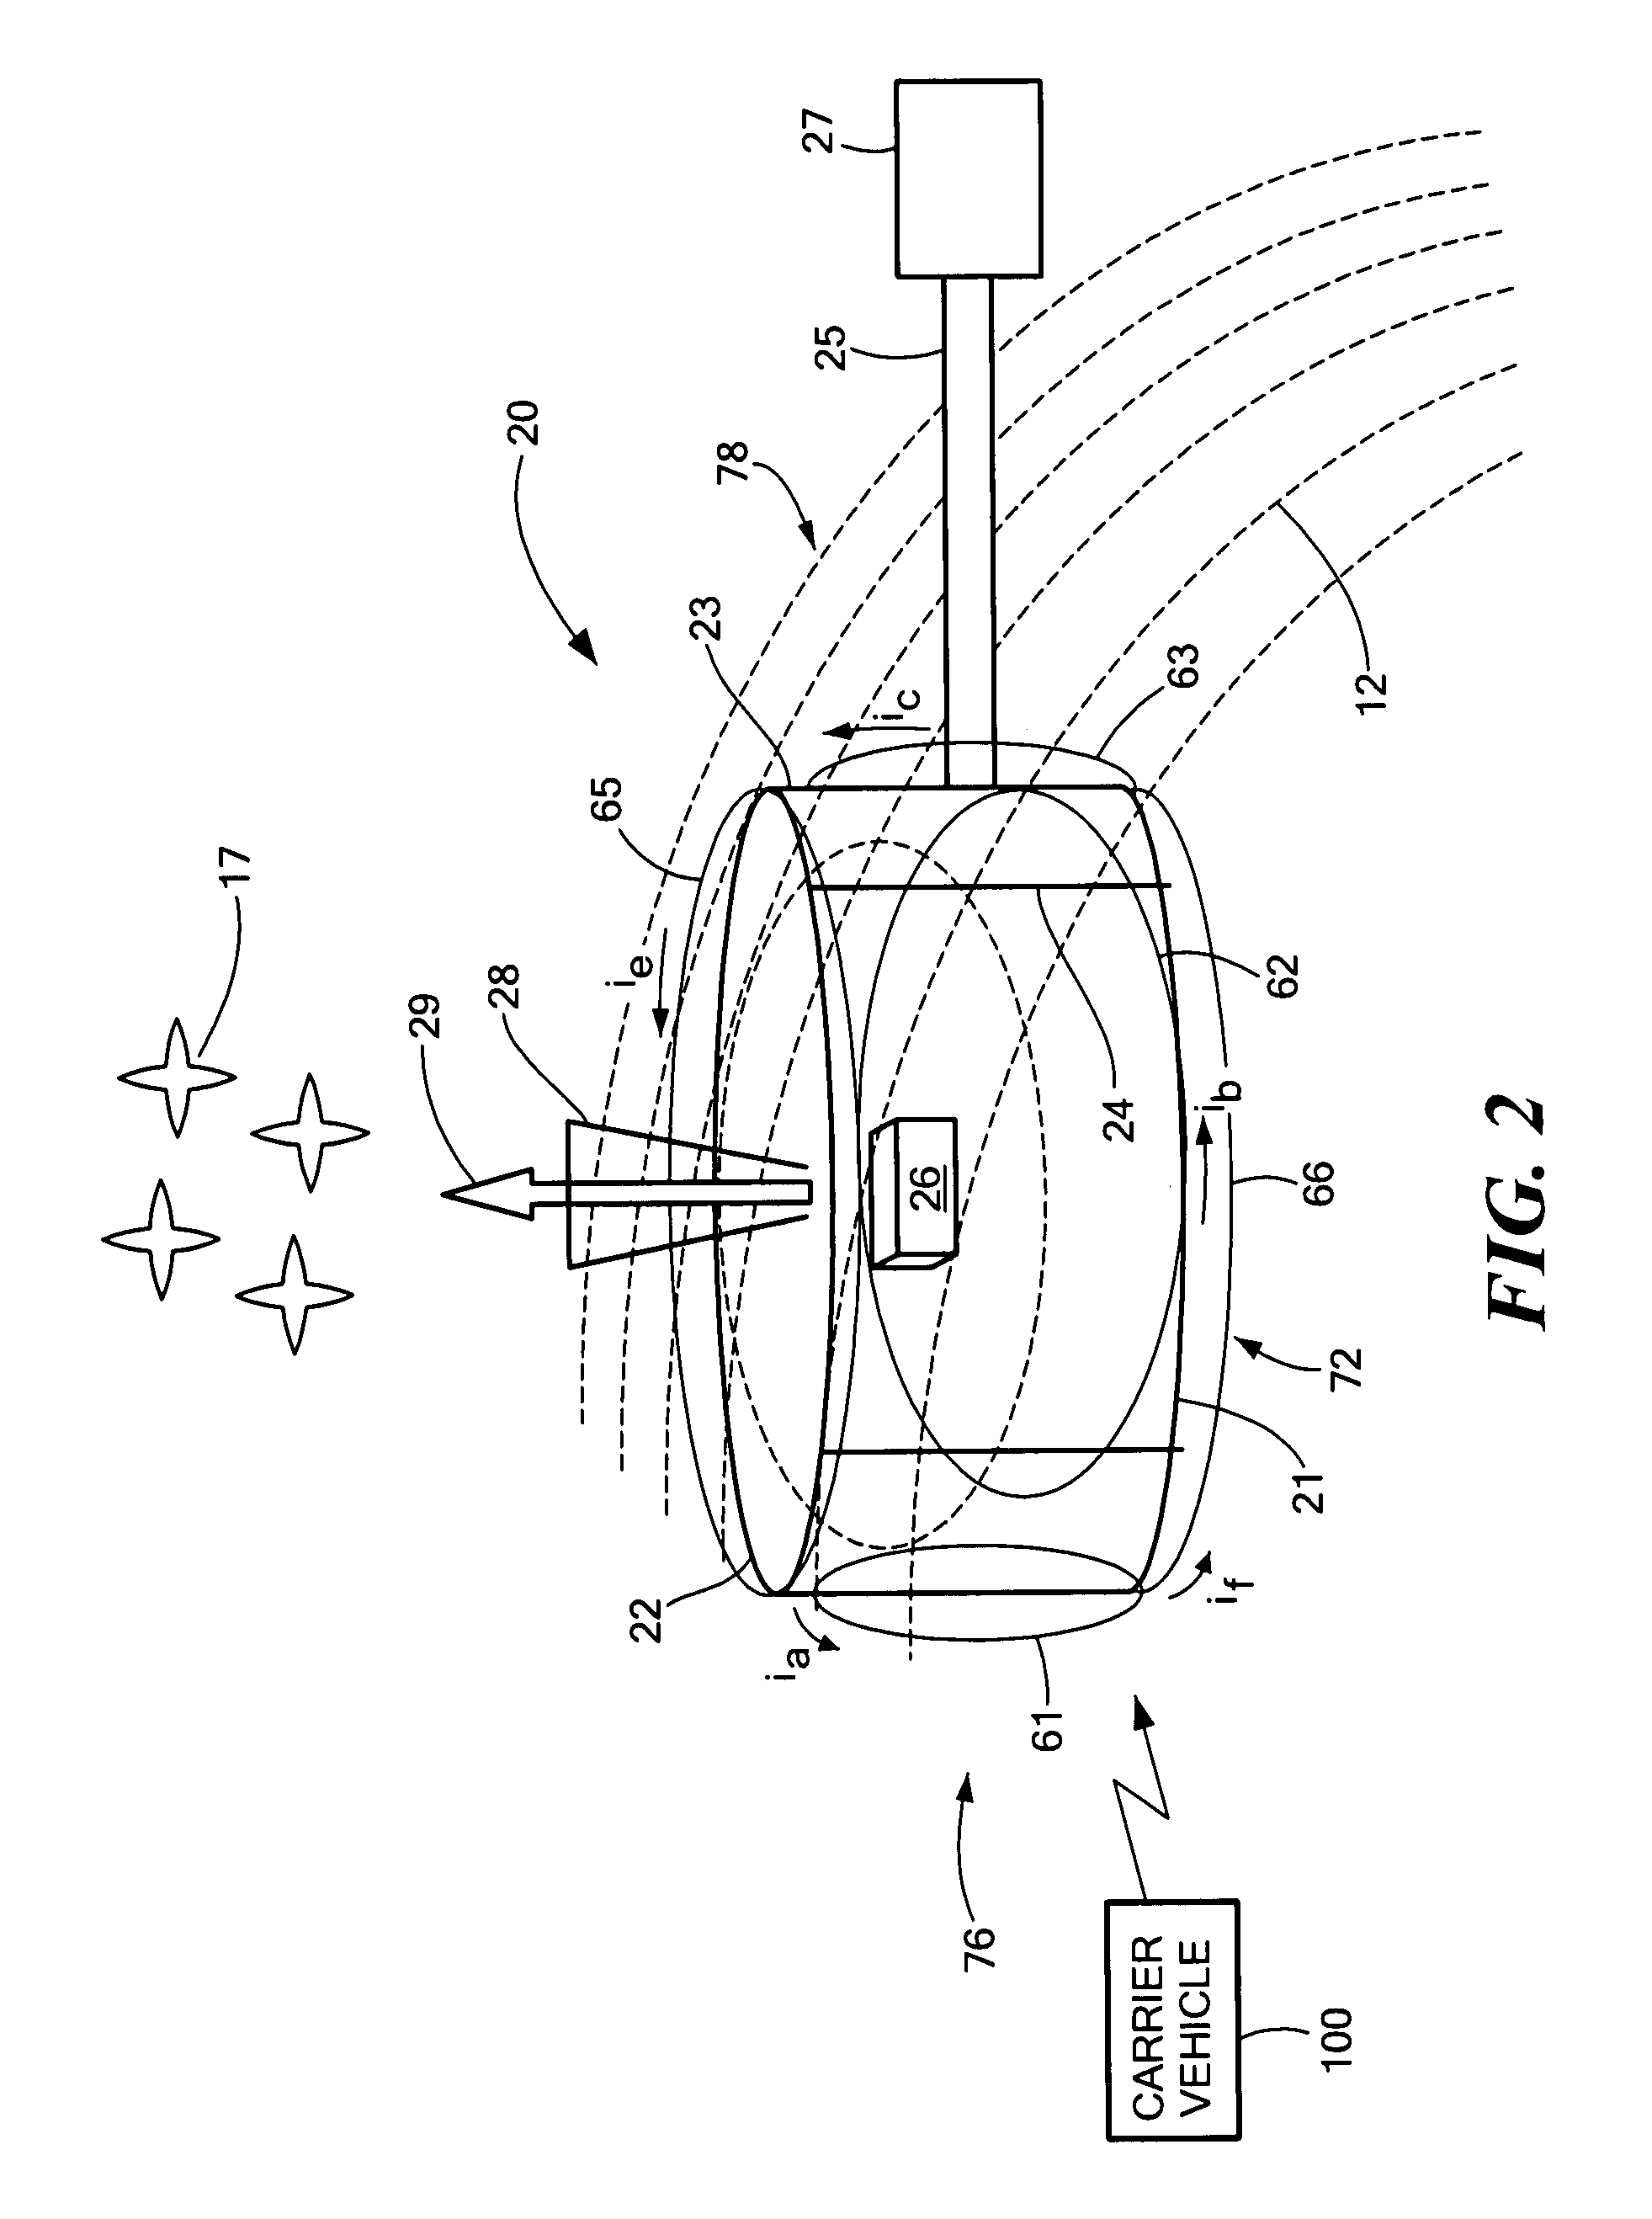 Method of determining and controlling the inertial attitude of a spinning, artificial satellite and systems therefor